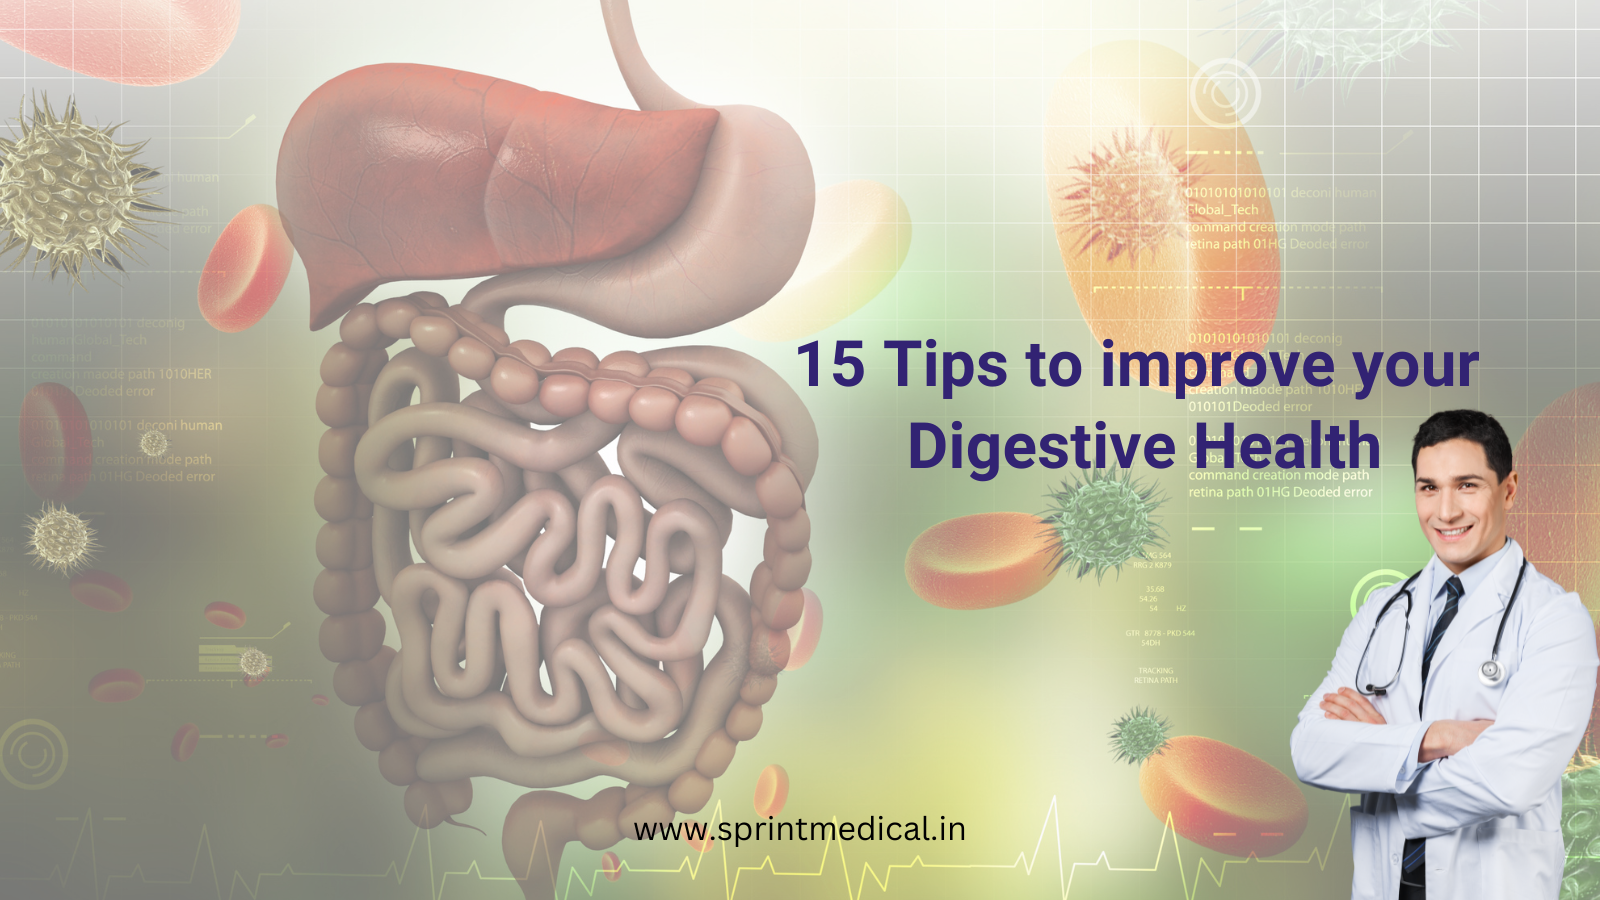 15 tips to improve digestive health